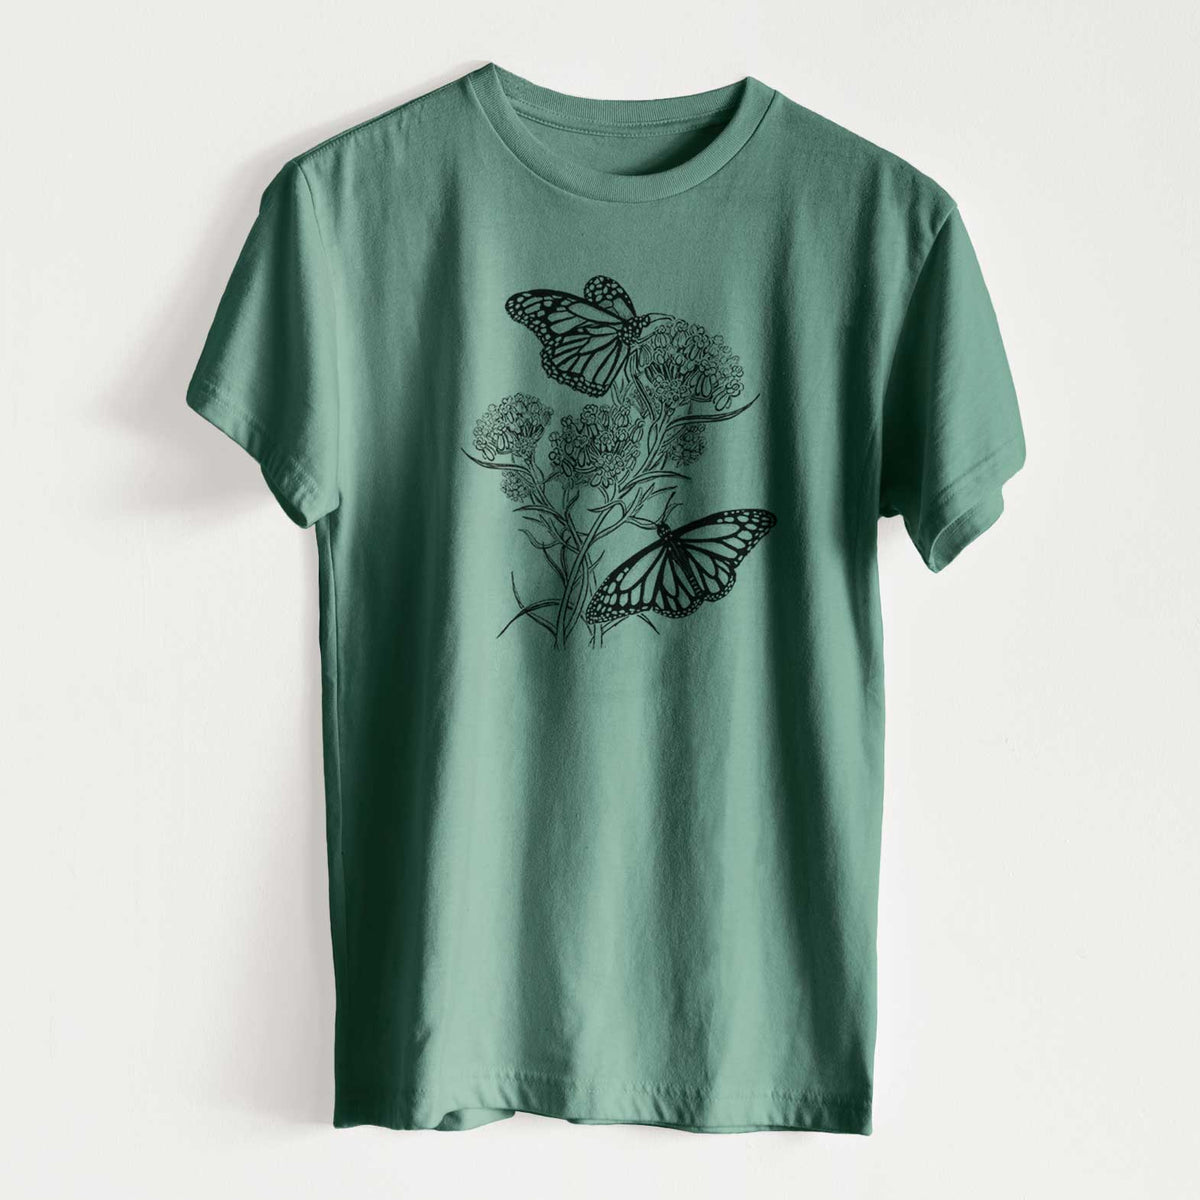 Narrowleaf Milkweed with Monarchs - Unisex Recycled Eco Tee  - CLOSEOUT - FINAL SALE